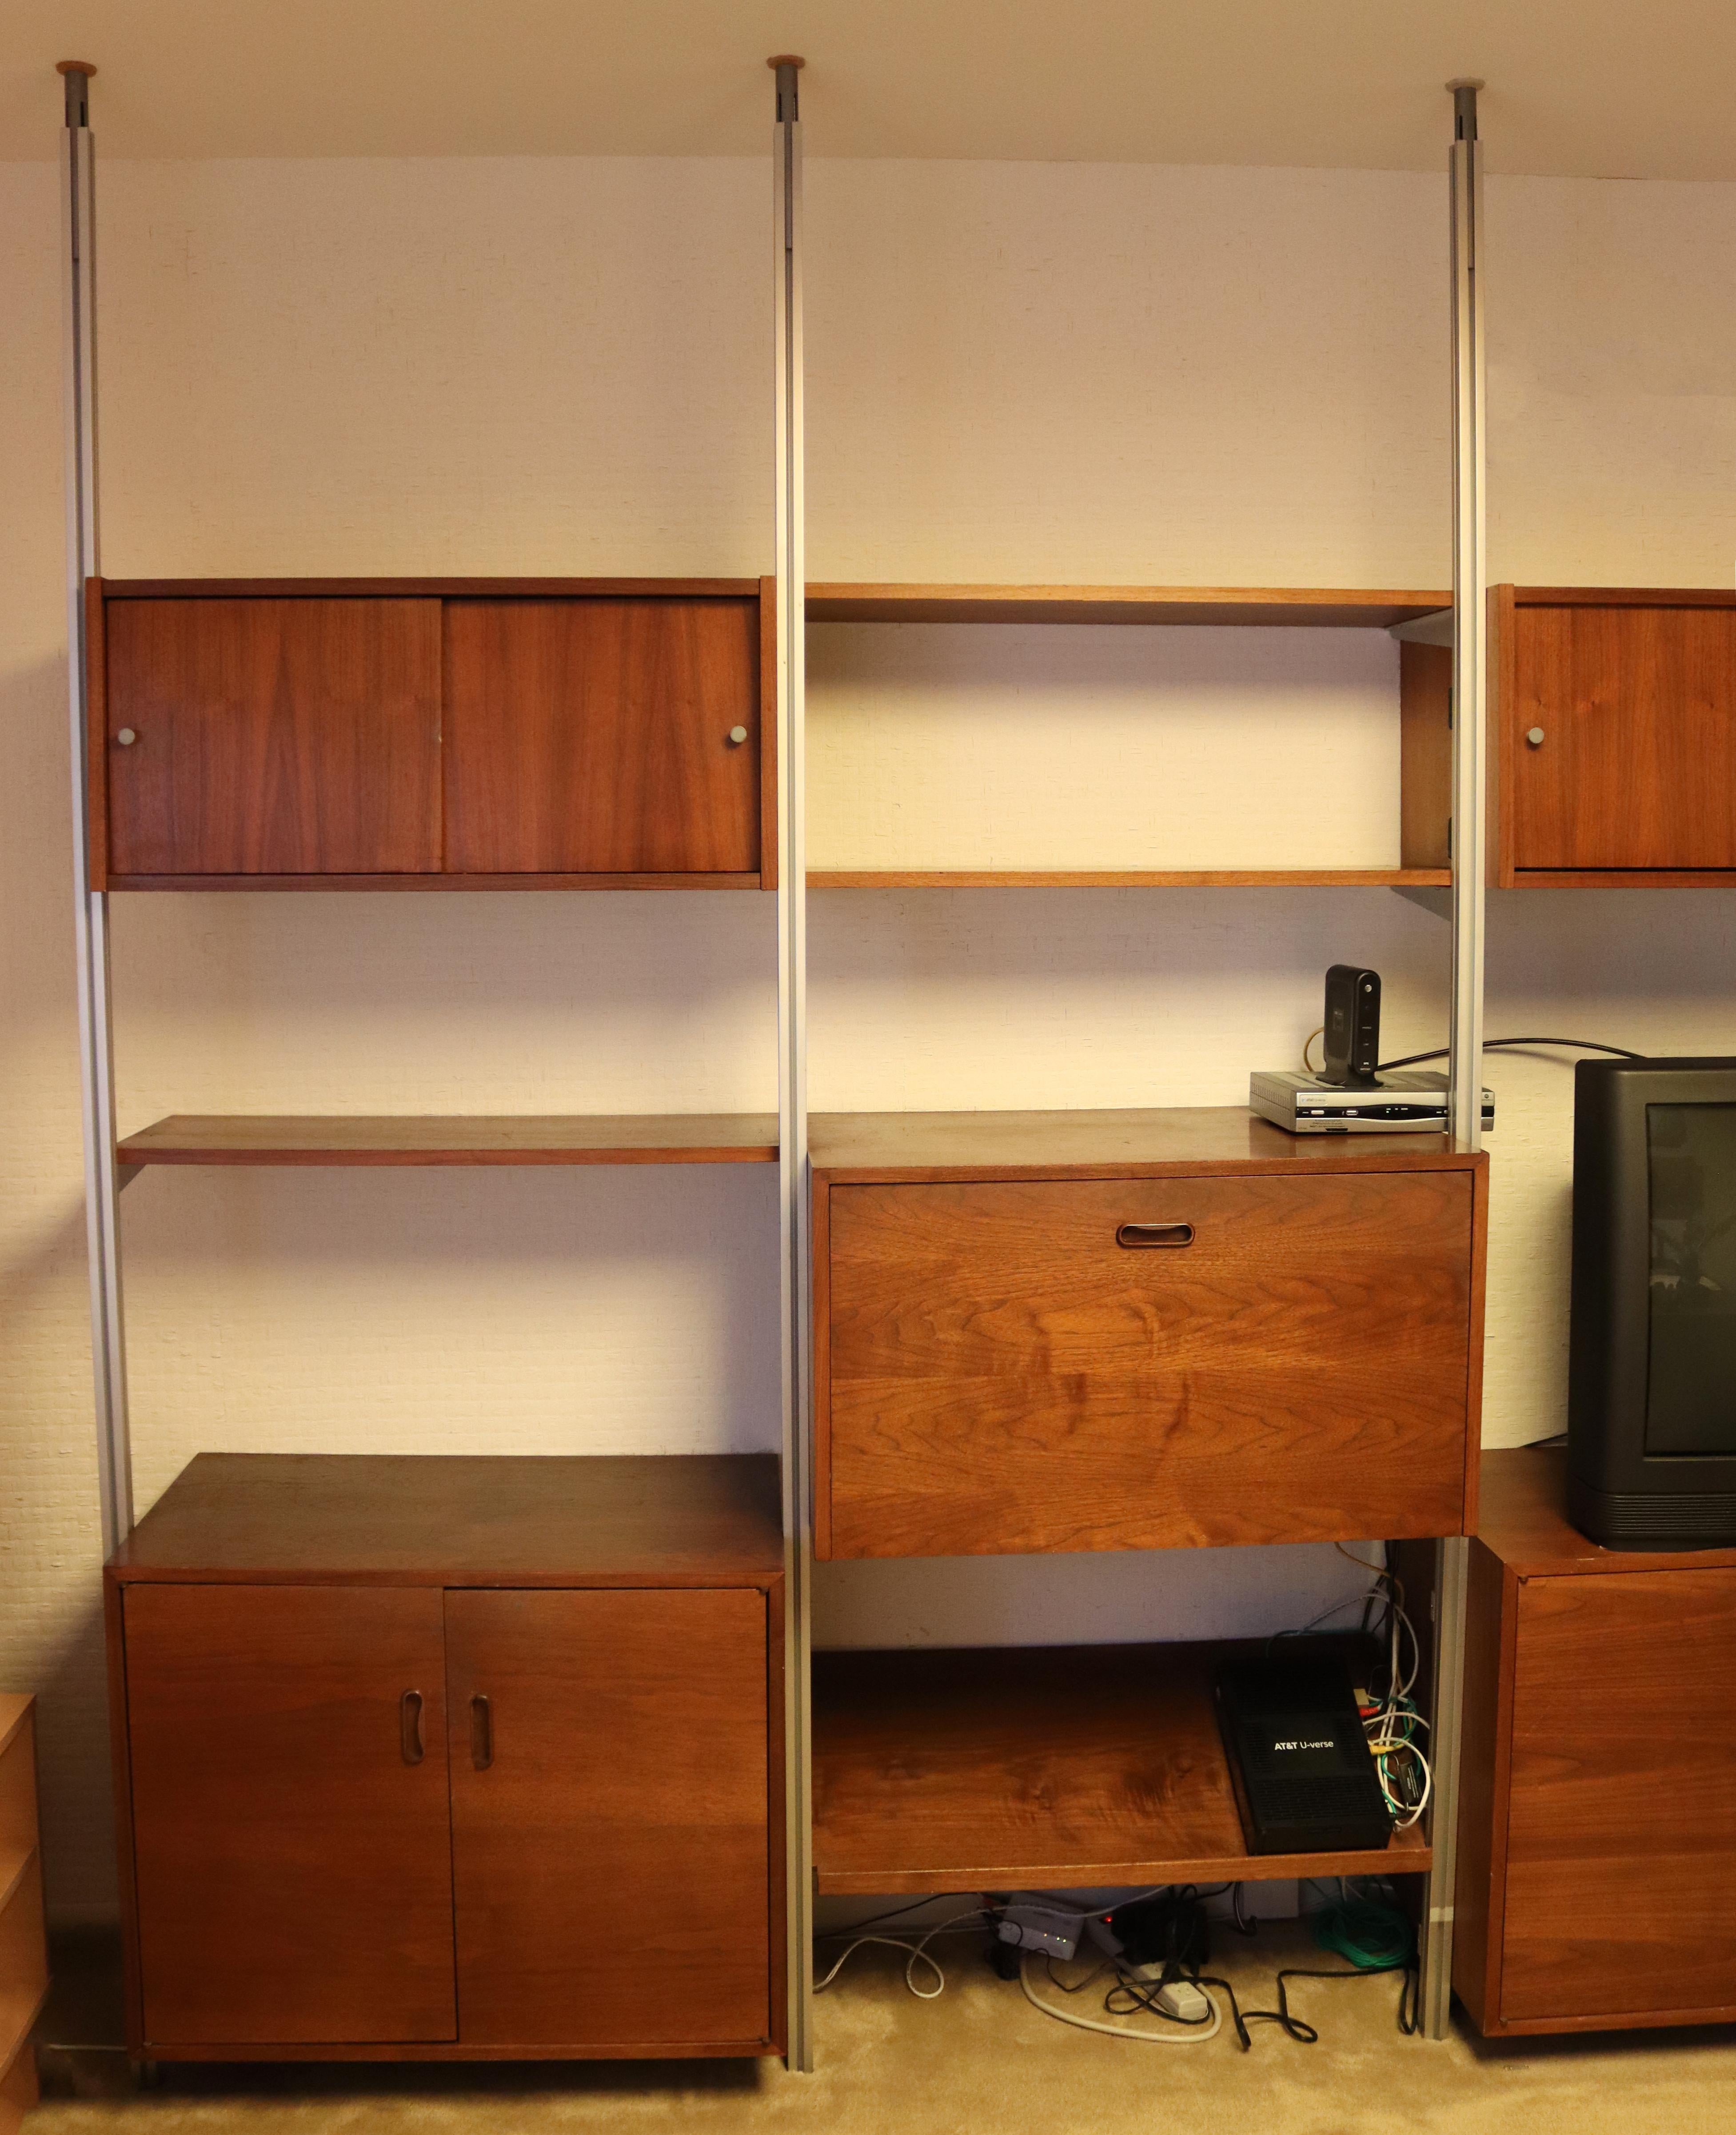 For your consideration is a phenomenal Omni wall unit, with three bays and tons of storage compartments, by George Nelson, circa the 1960s. In excellent vintage condition. Dimensions: 98